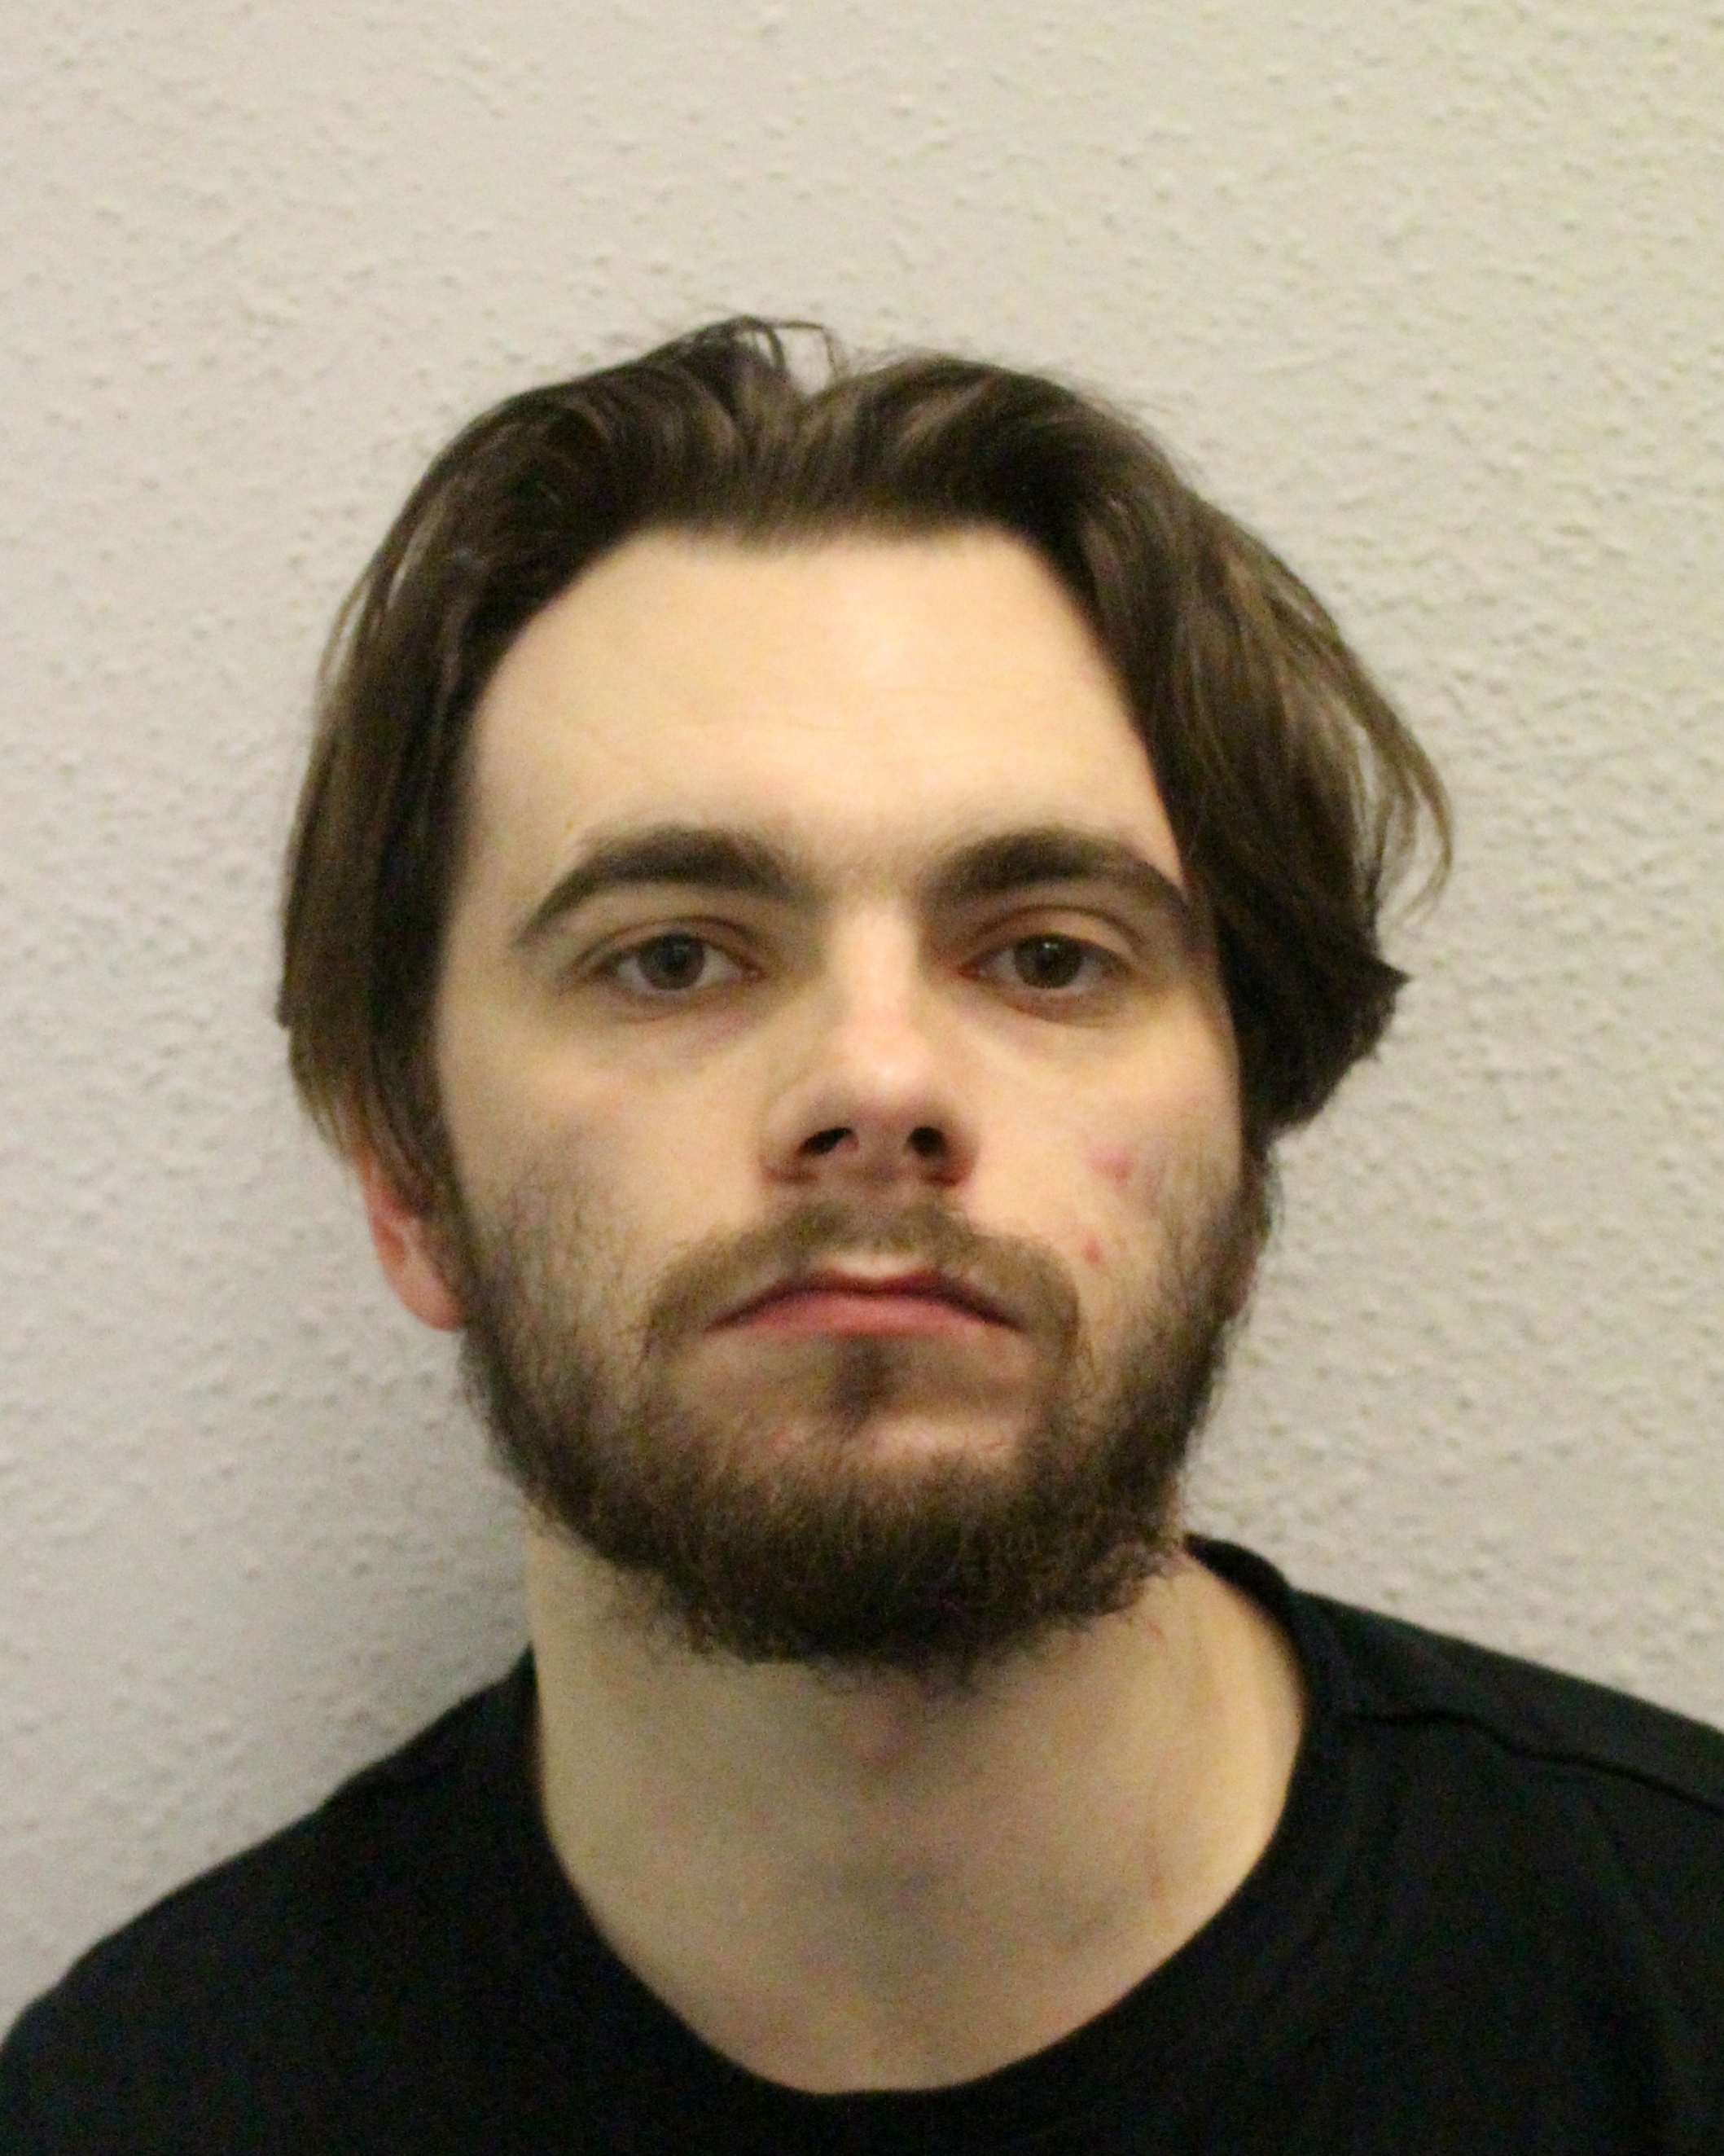 Greenwich drug dealer found with 72 wraps of crack cocaine jailed